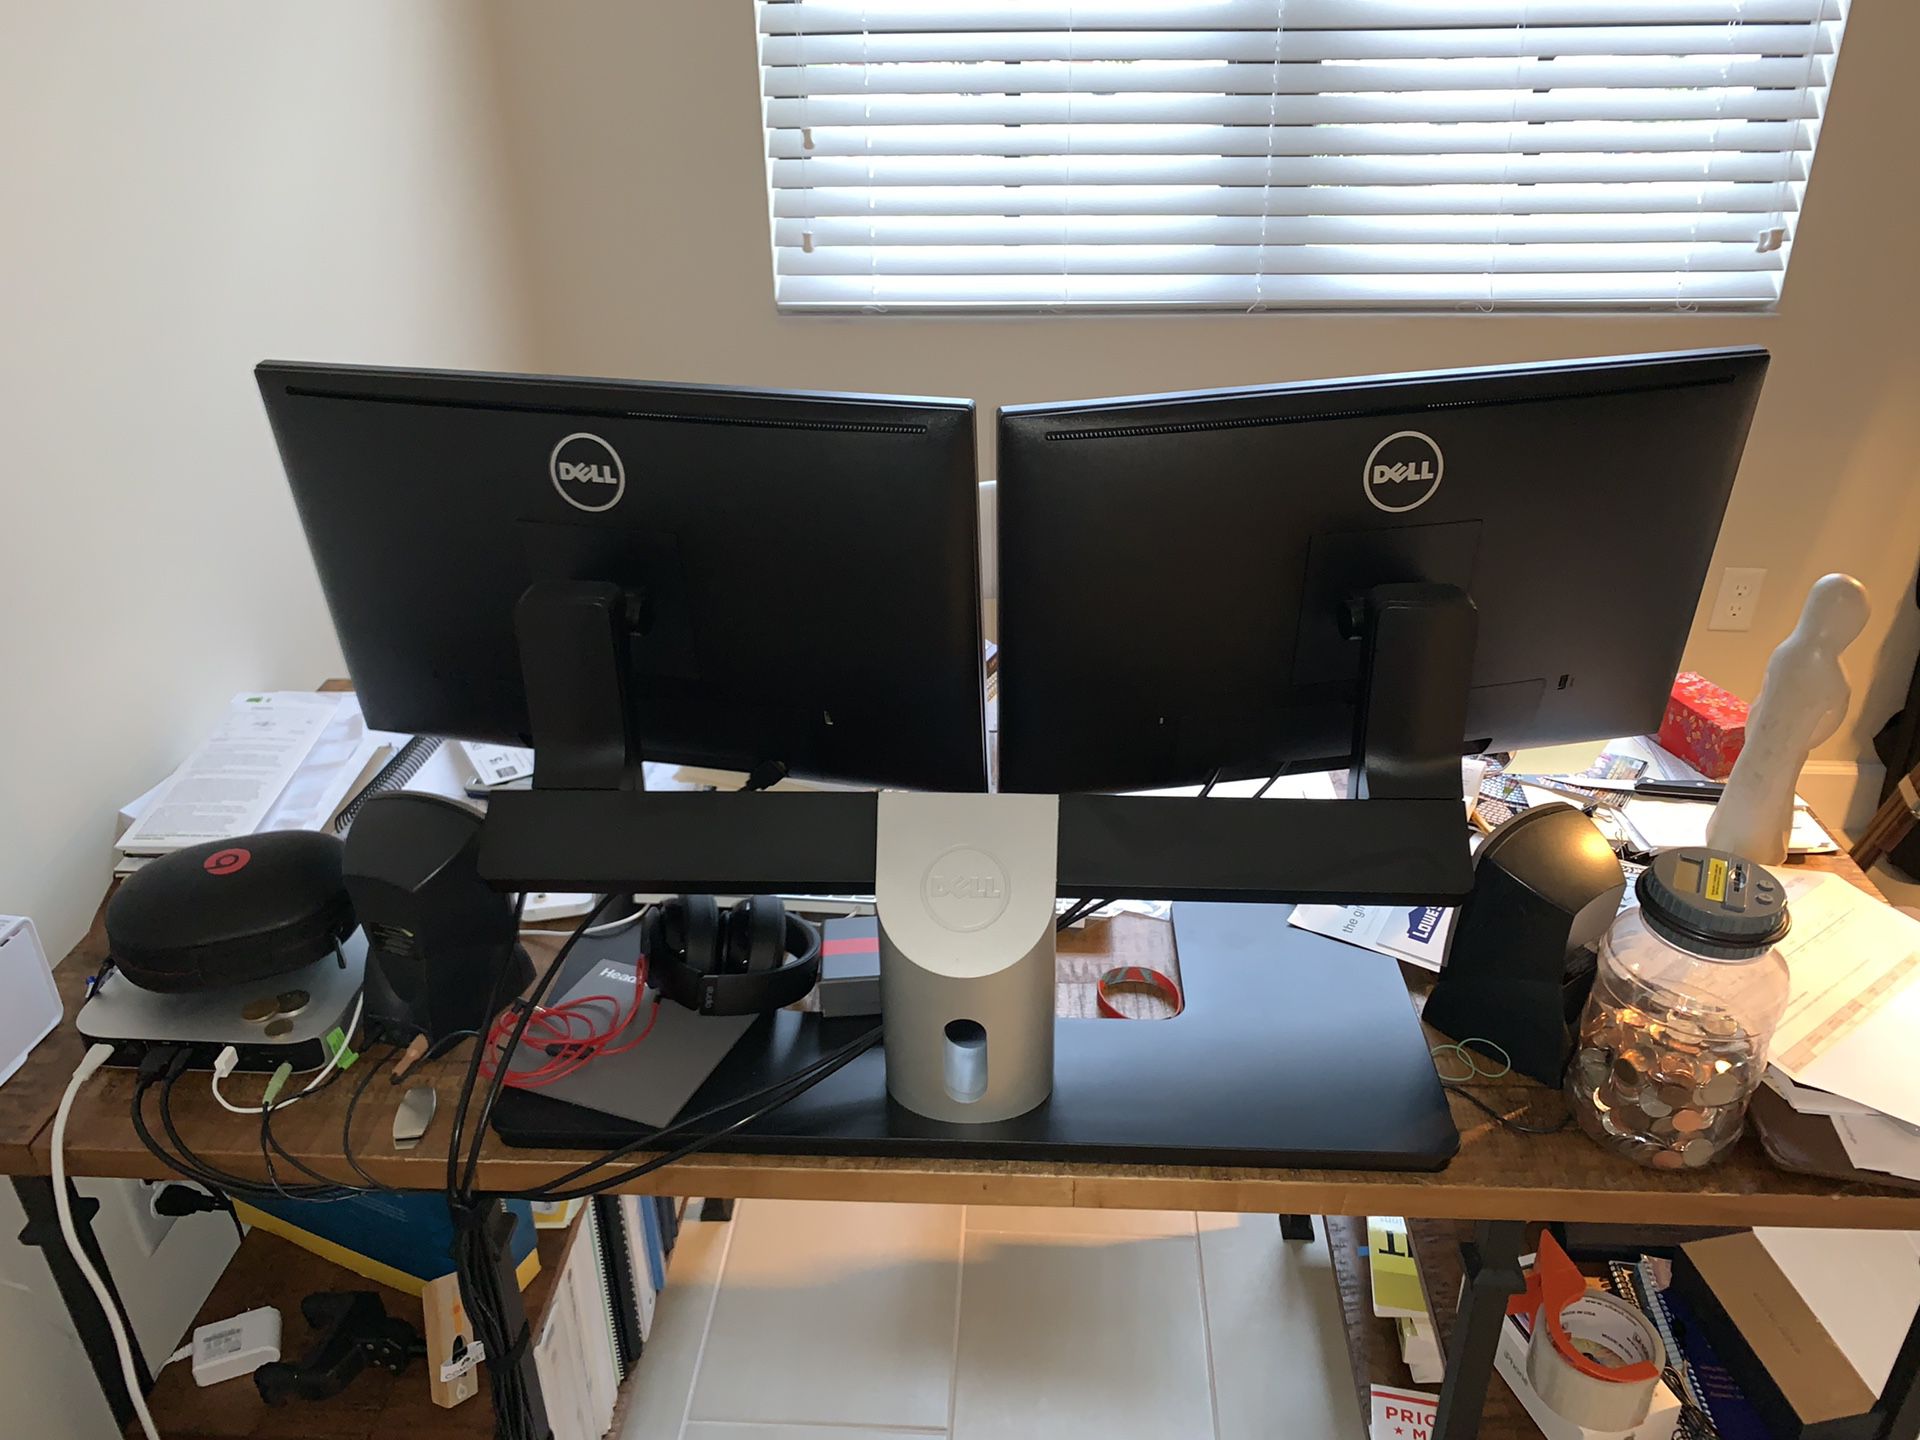 Dell™ 469-3993 24" Desktop Dual Monitor Stand ONLY